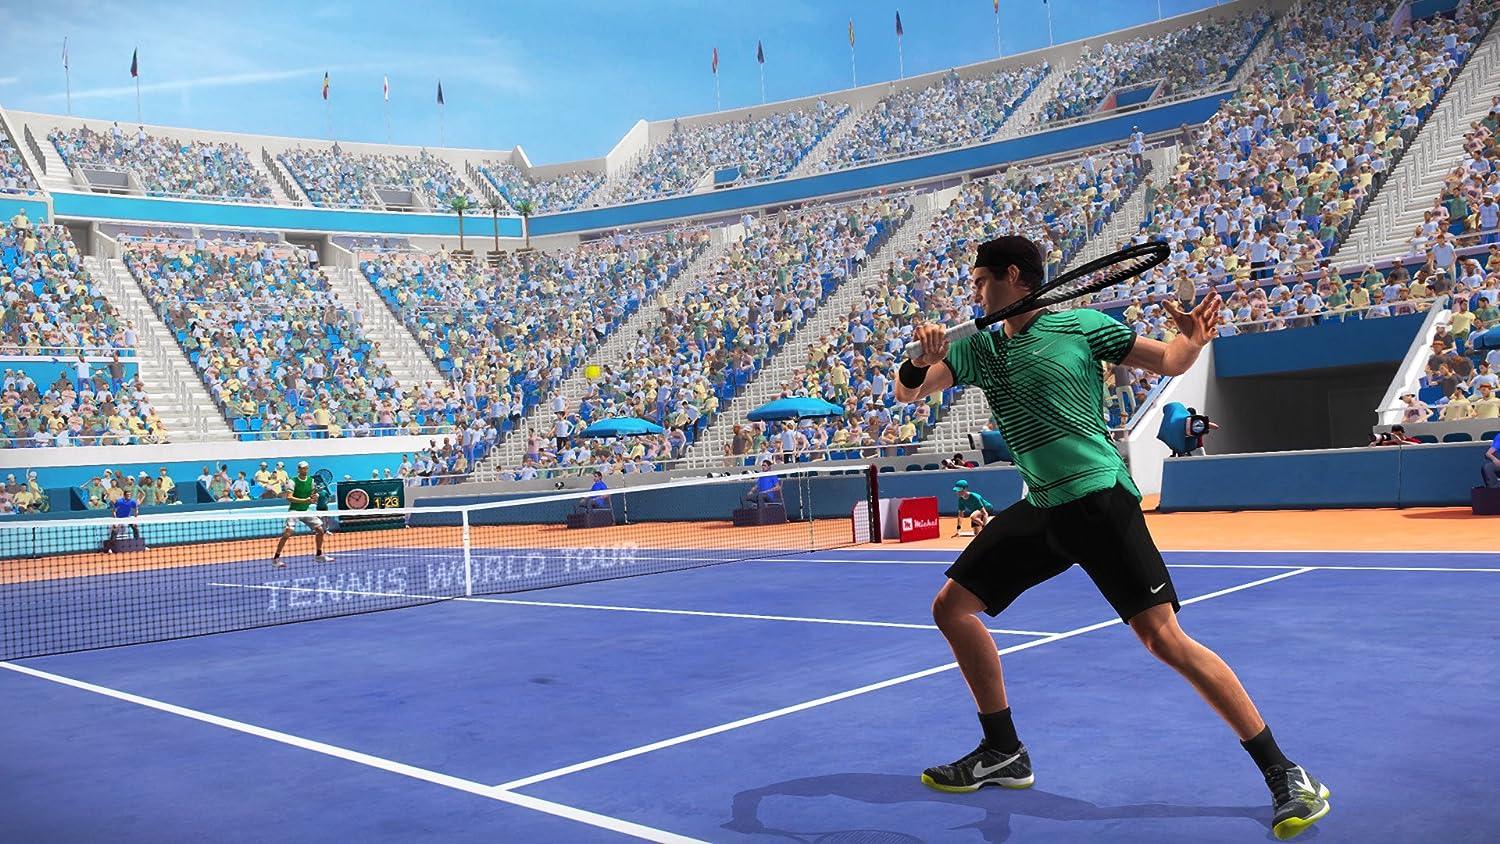 Tennis World Tour (Xbox One) (Pre-owned) - GameStore.mt | Powered by Flutisat